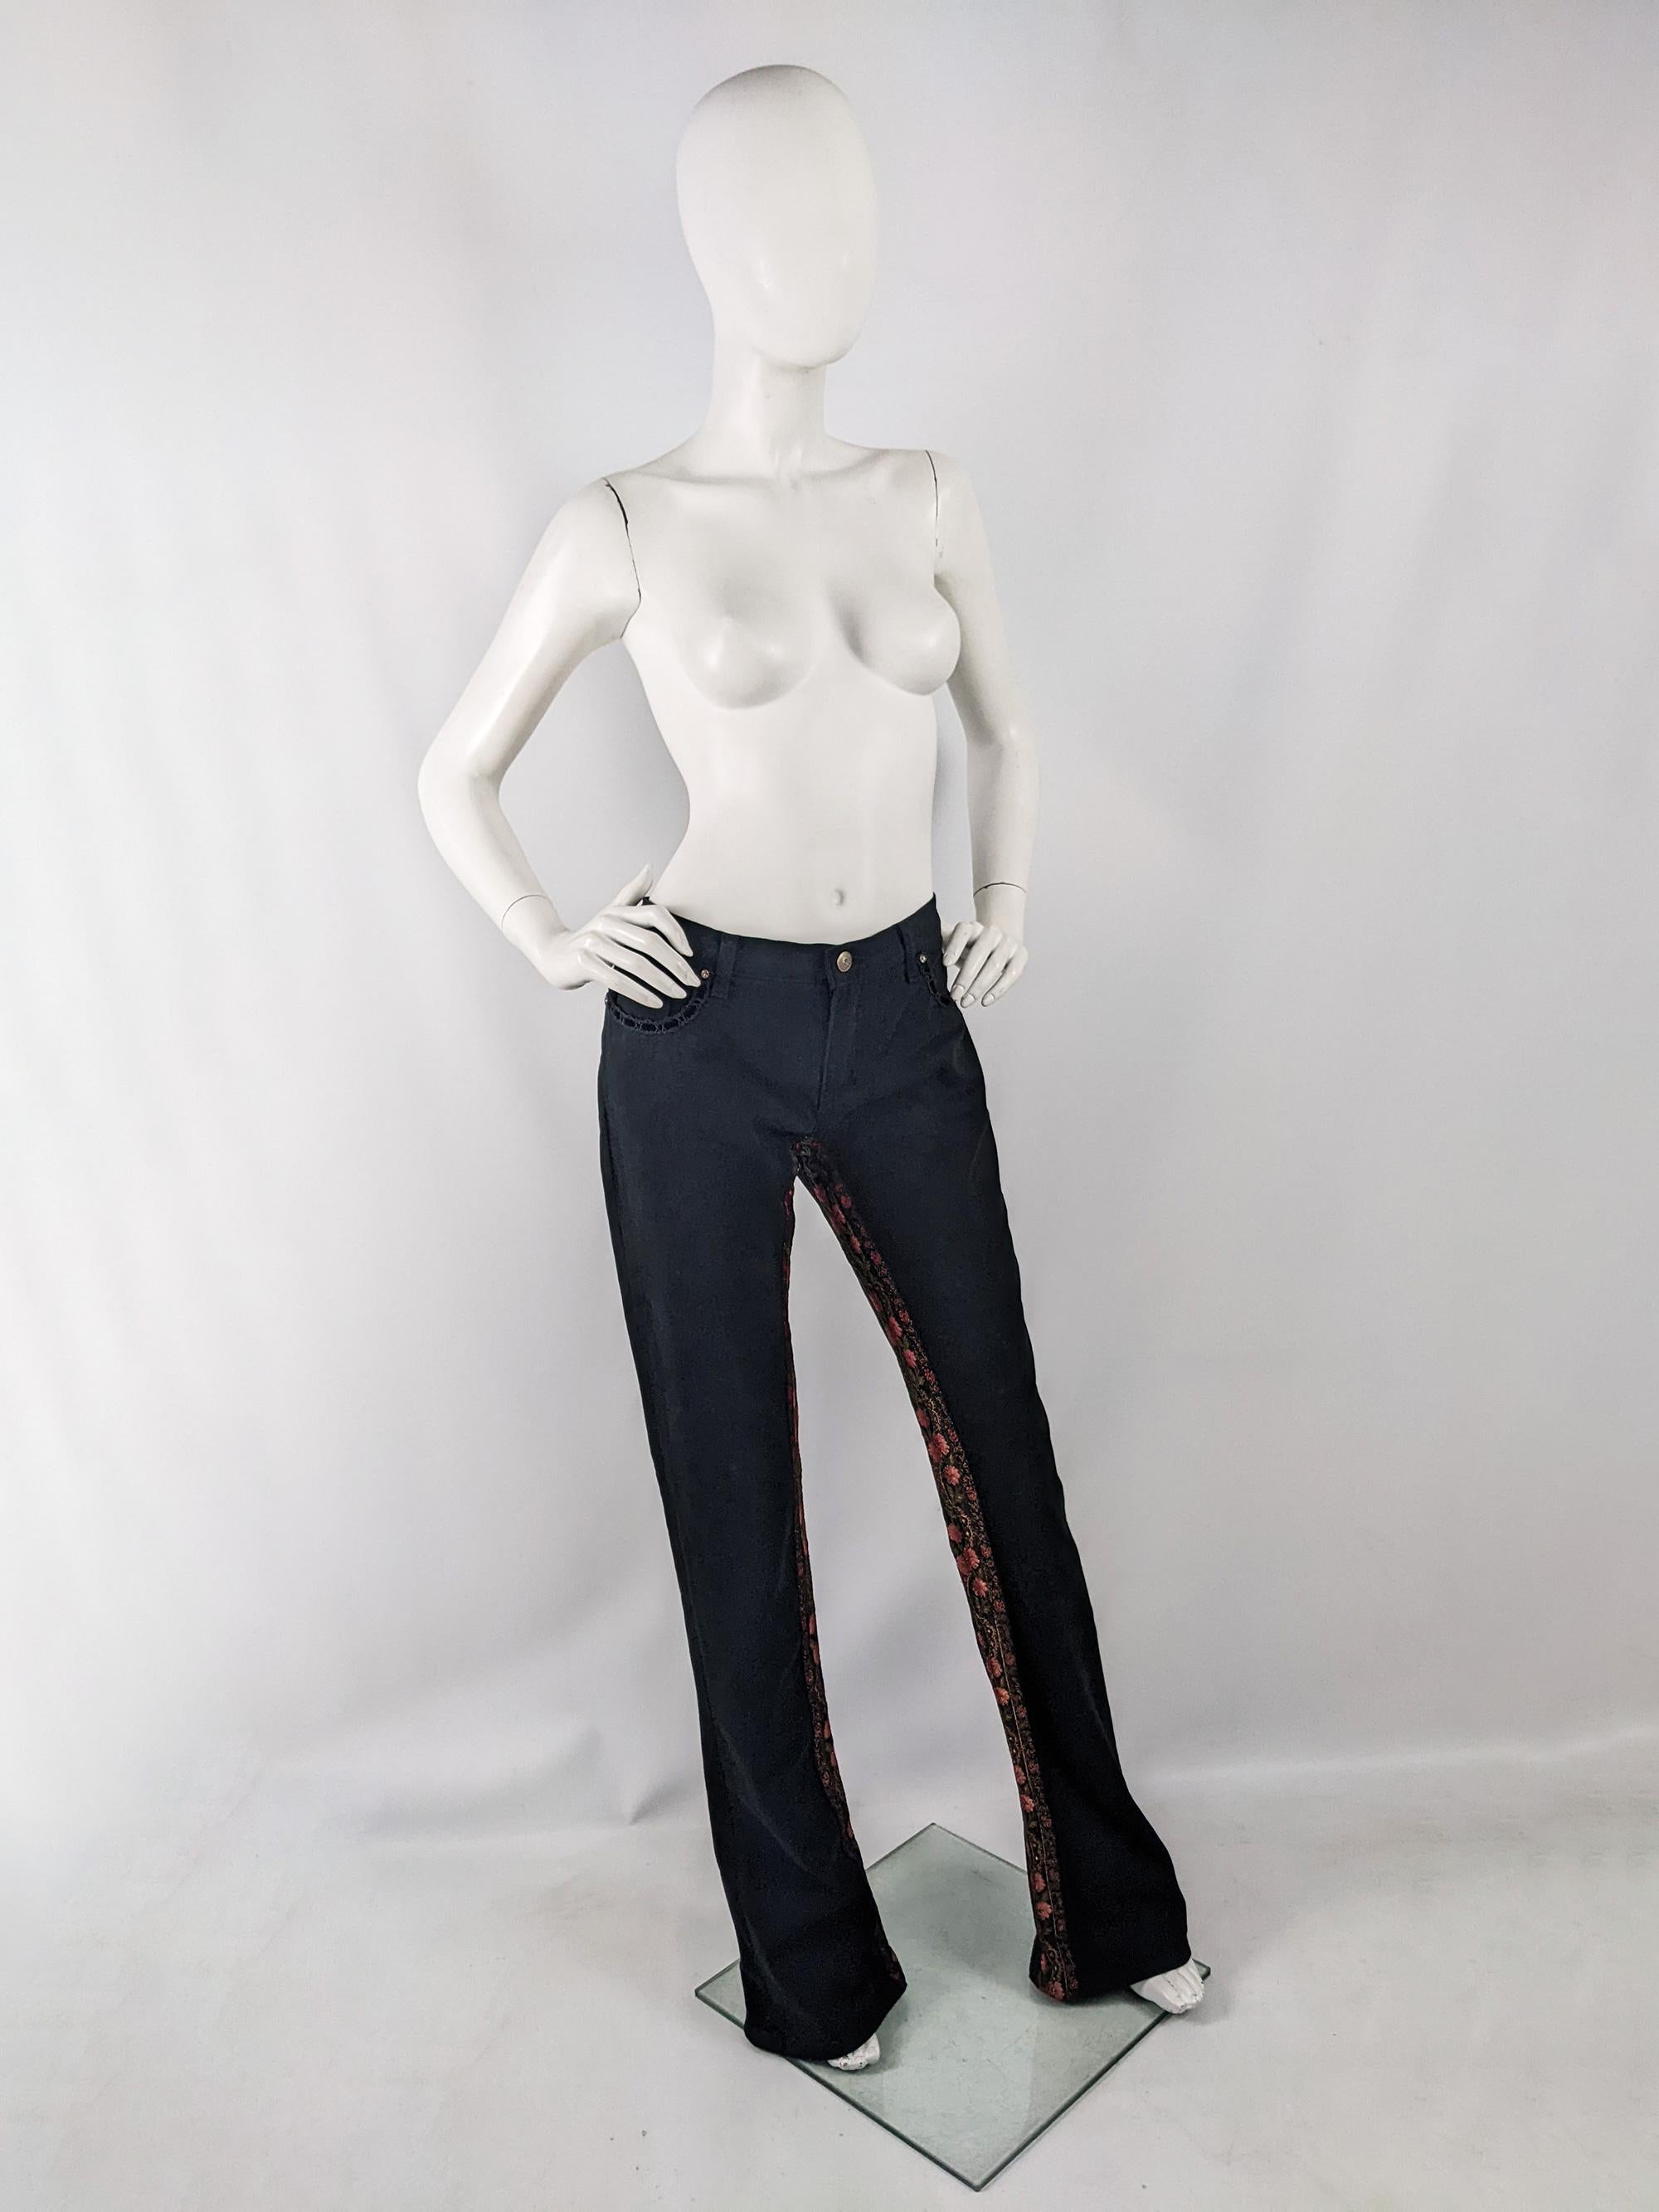 An incredible vintage pair of jeans from the late 90s/ early 2000s by luxury British label, Voyage for their Passion line. In a black denim with a low waist, bootcut flare and ultra long leg that is meant to be worn with heels. It has a metallic